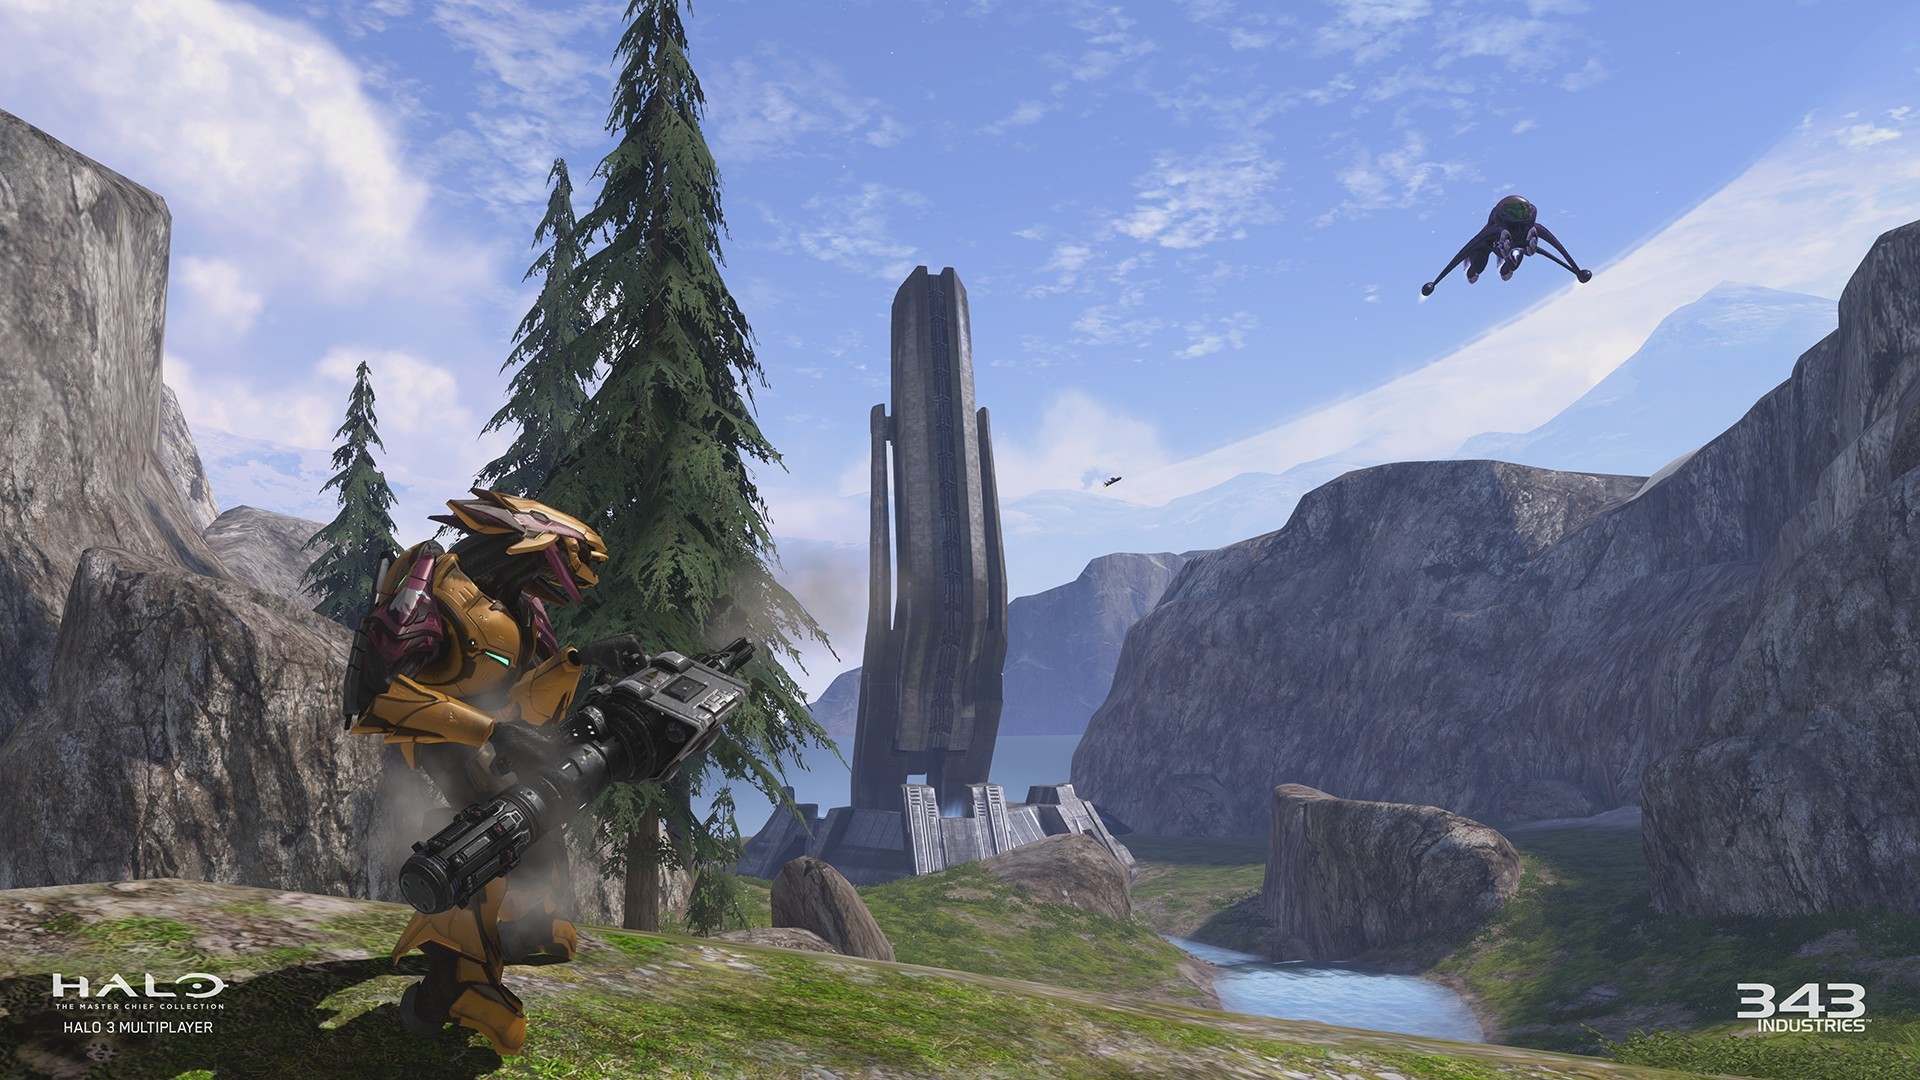 can you still buy halo 1 for pc